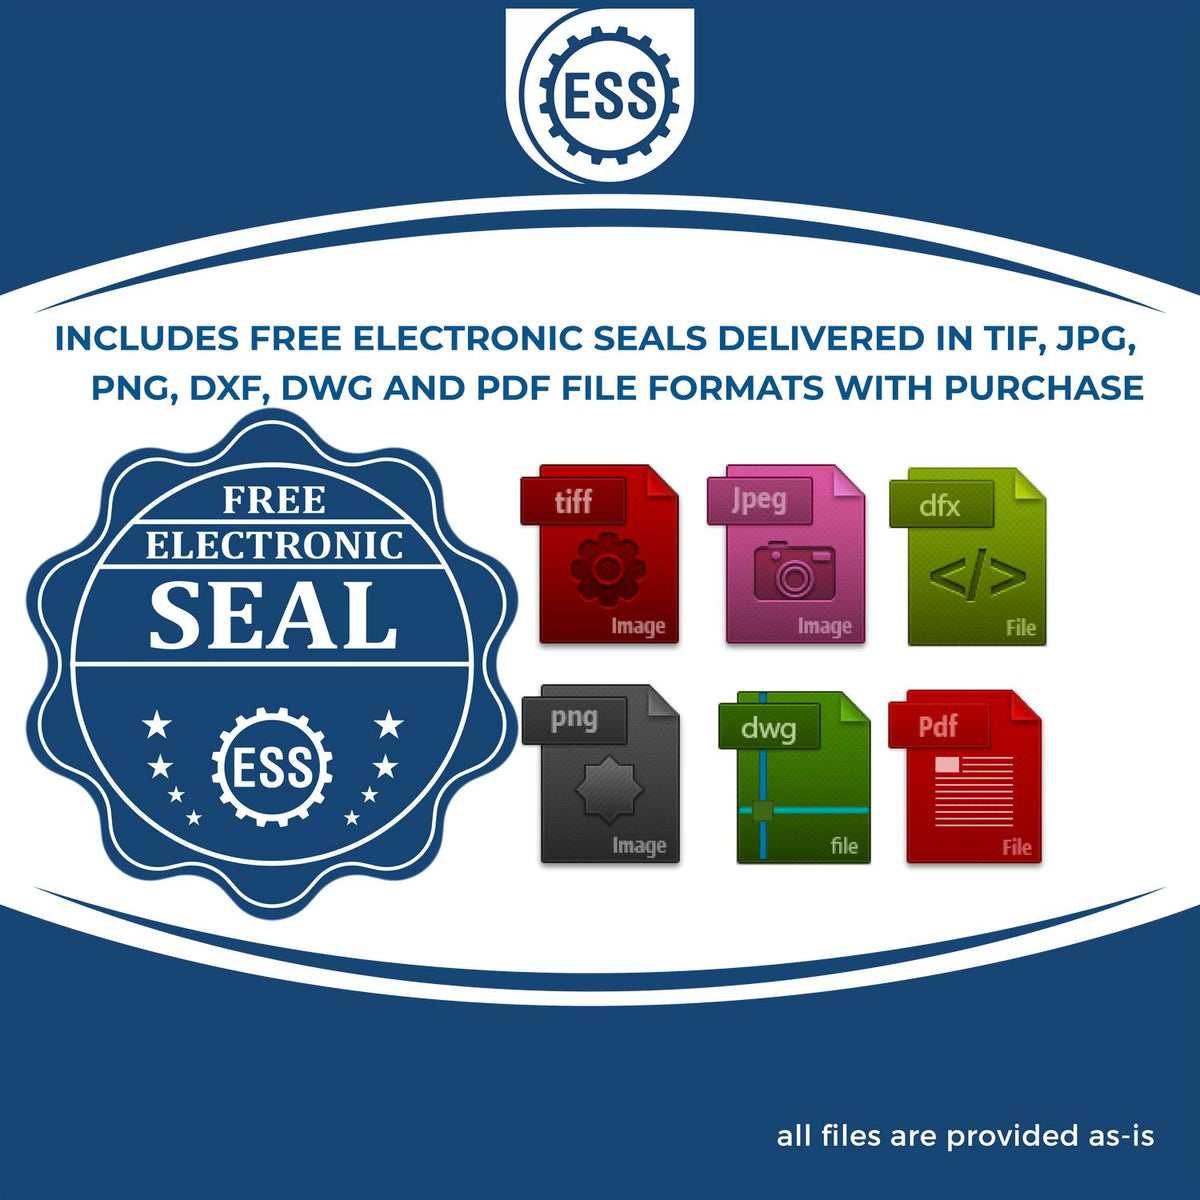 An infographic for the free electronic seal for the Slim Pre-Inked West Virginia Landscape Architect Seal Stamp illustrating the different file type icons such as DXF, DWG, TIF, JPG and PNG.